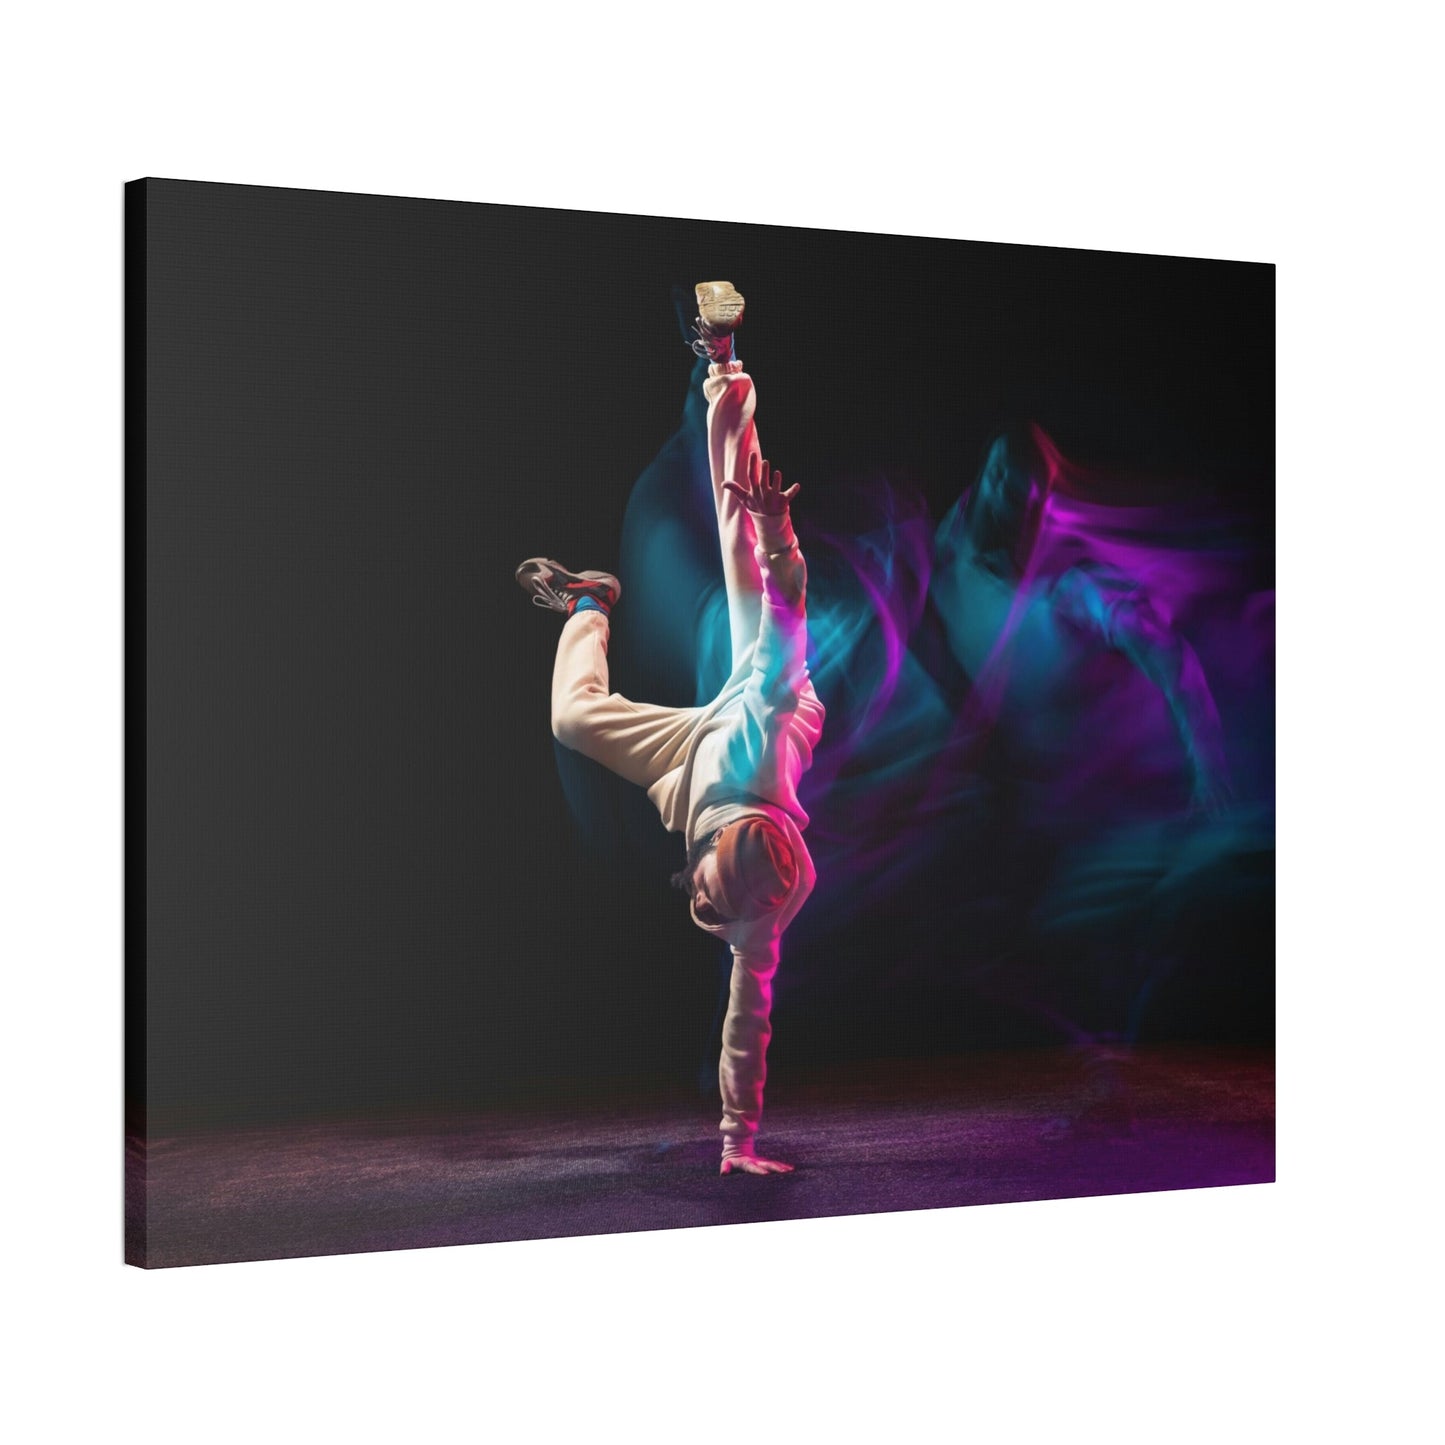 Art of Movement: Natural Canvas and Framed Poster of Dance Choreography